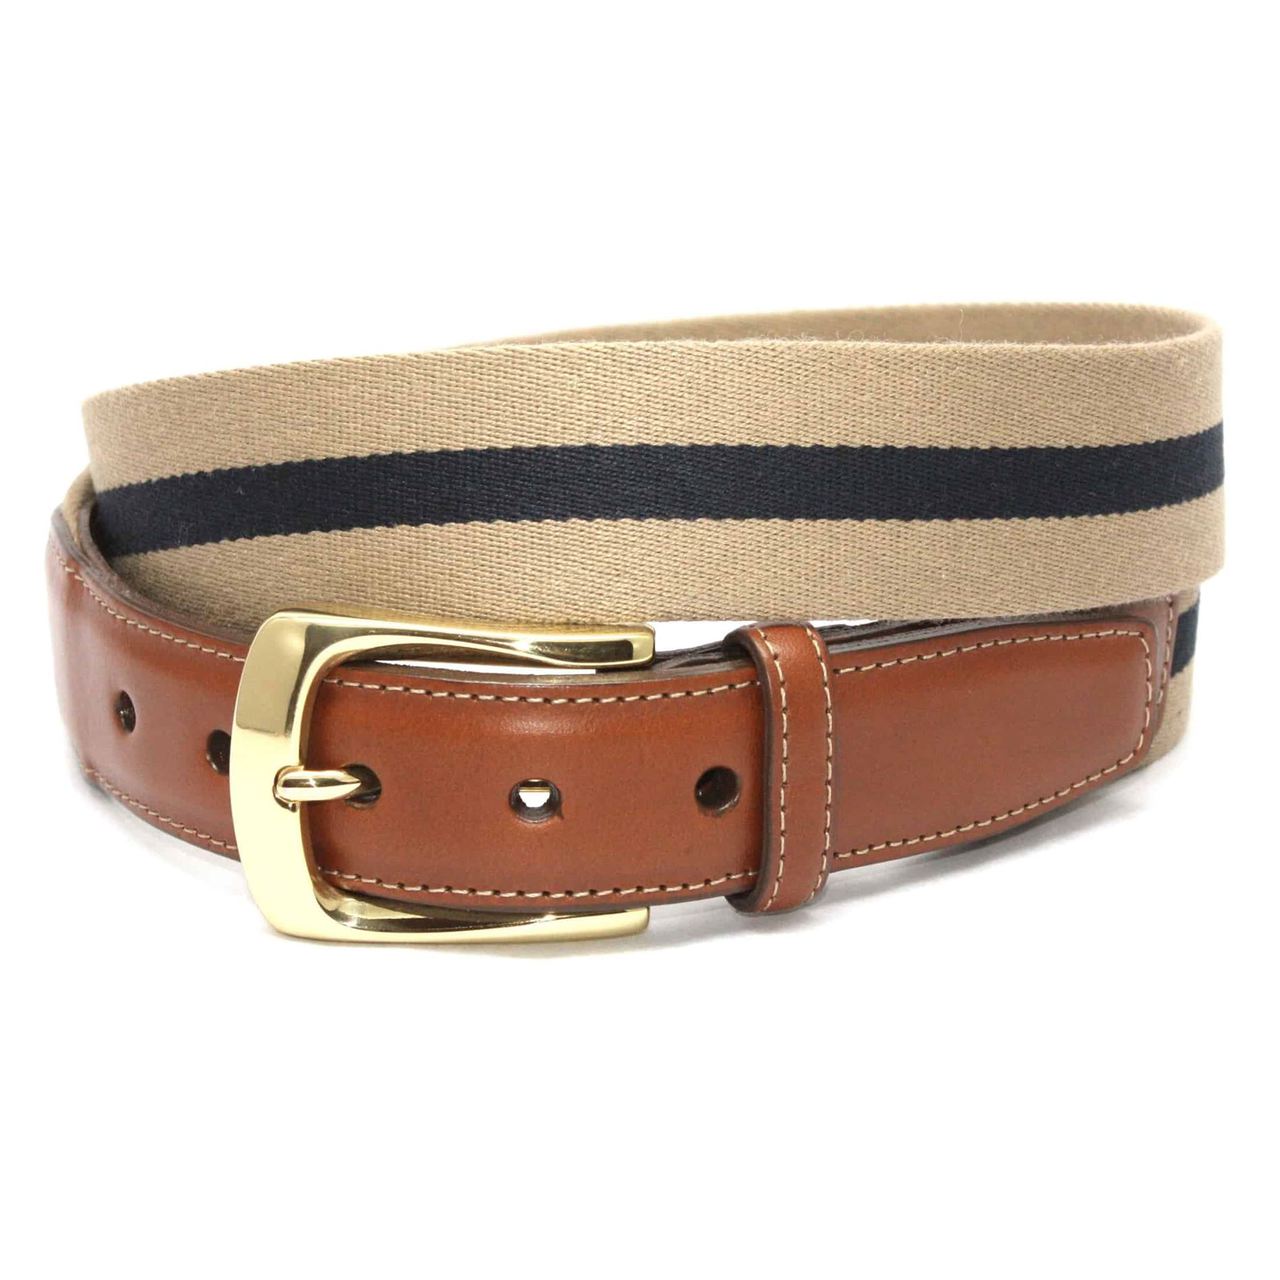 Italian Woven Cotton Belt in Tan, Brown & Cream by Torino Leather Co. -  Hansen's Clothing